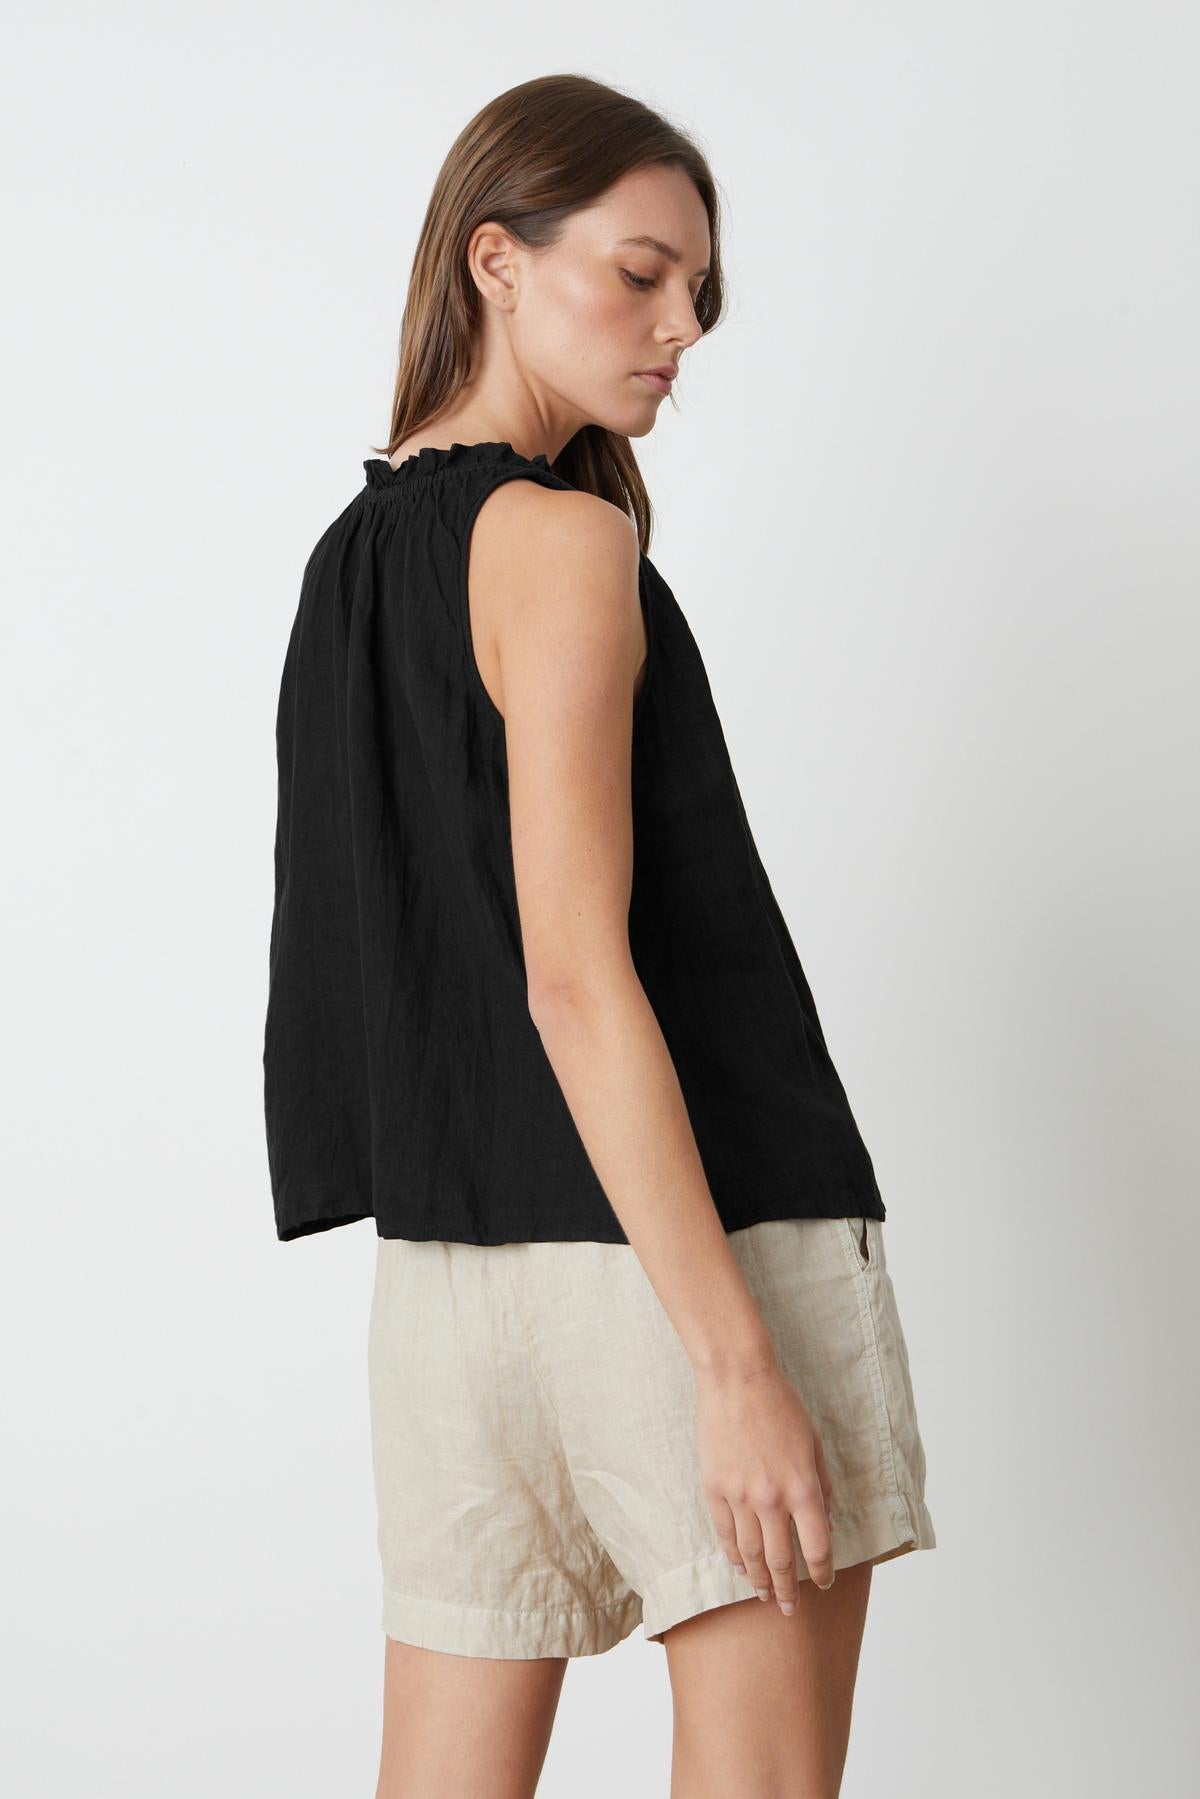 The back view of a woman wearing the Velvet by Graham & Spencer Zoey Linen V-Neck Tank Top and beige shorts.-35201191674049